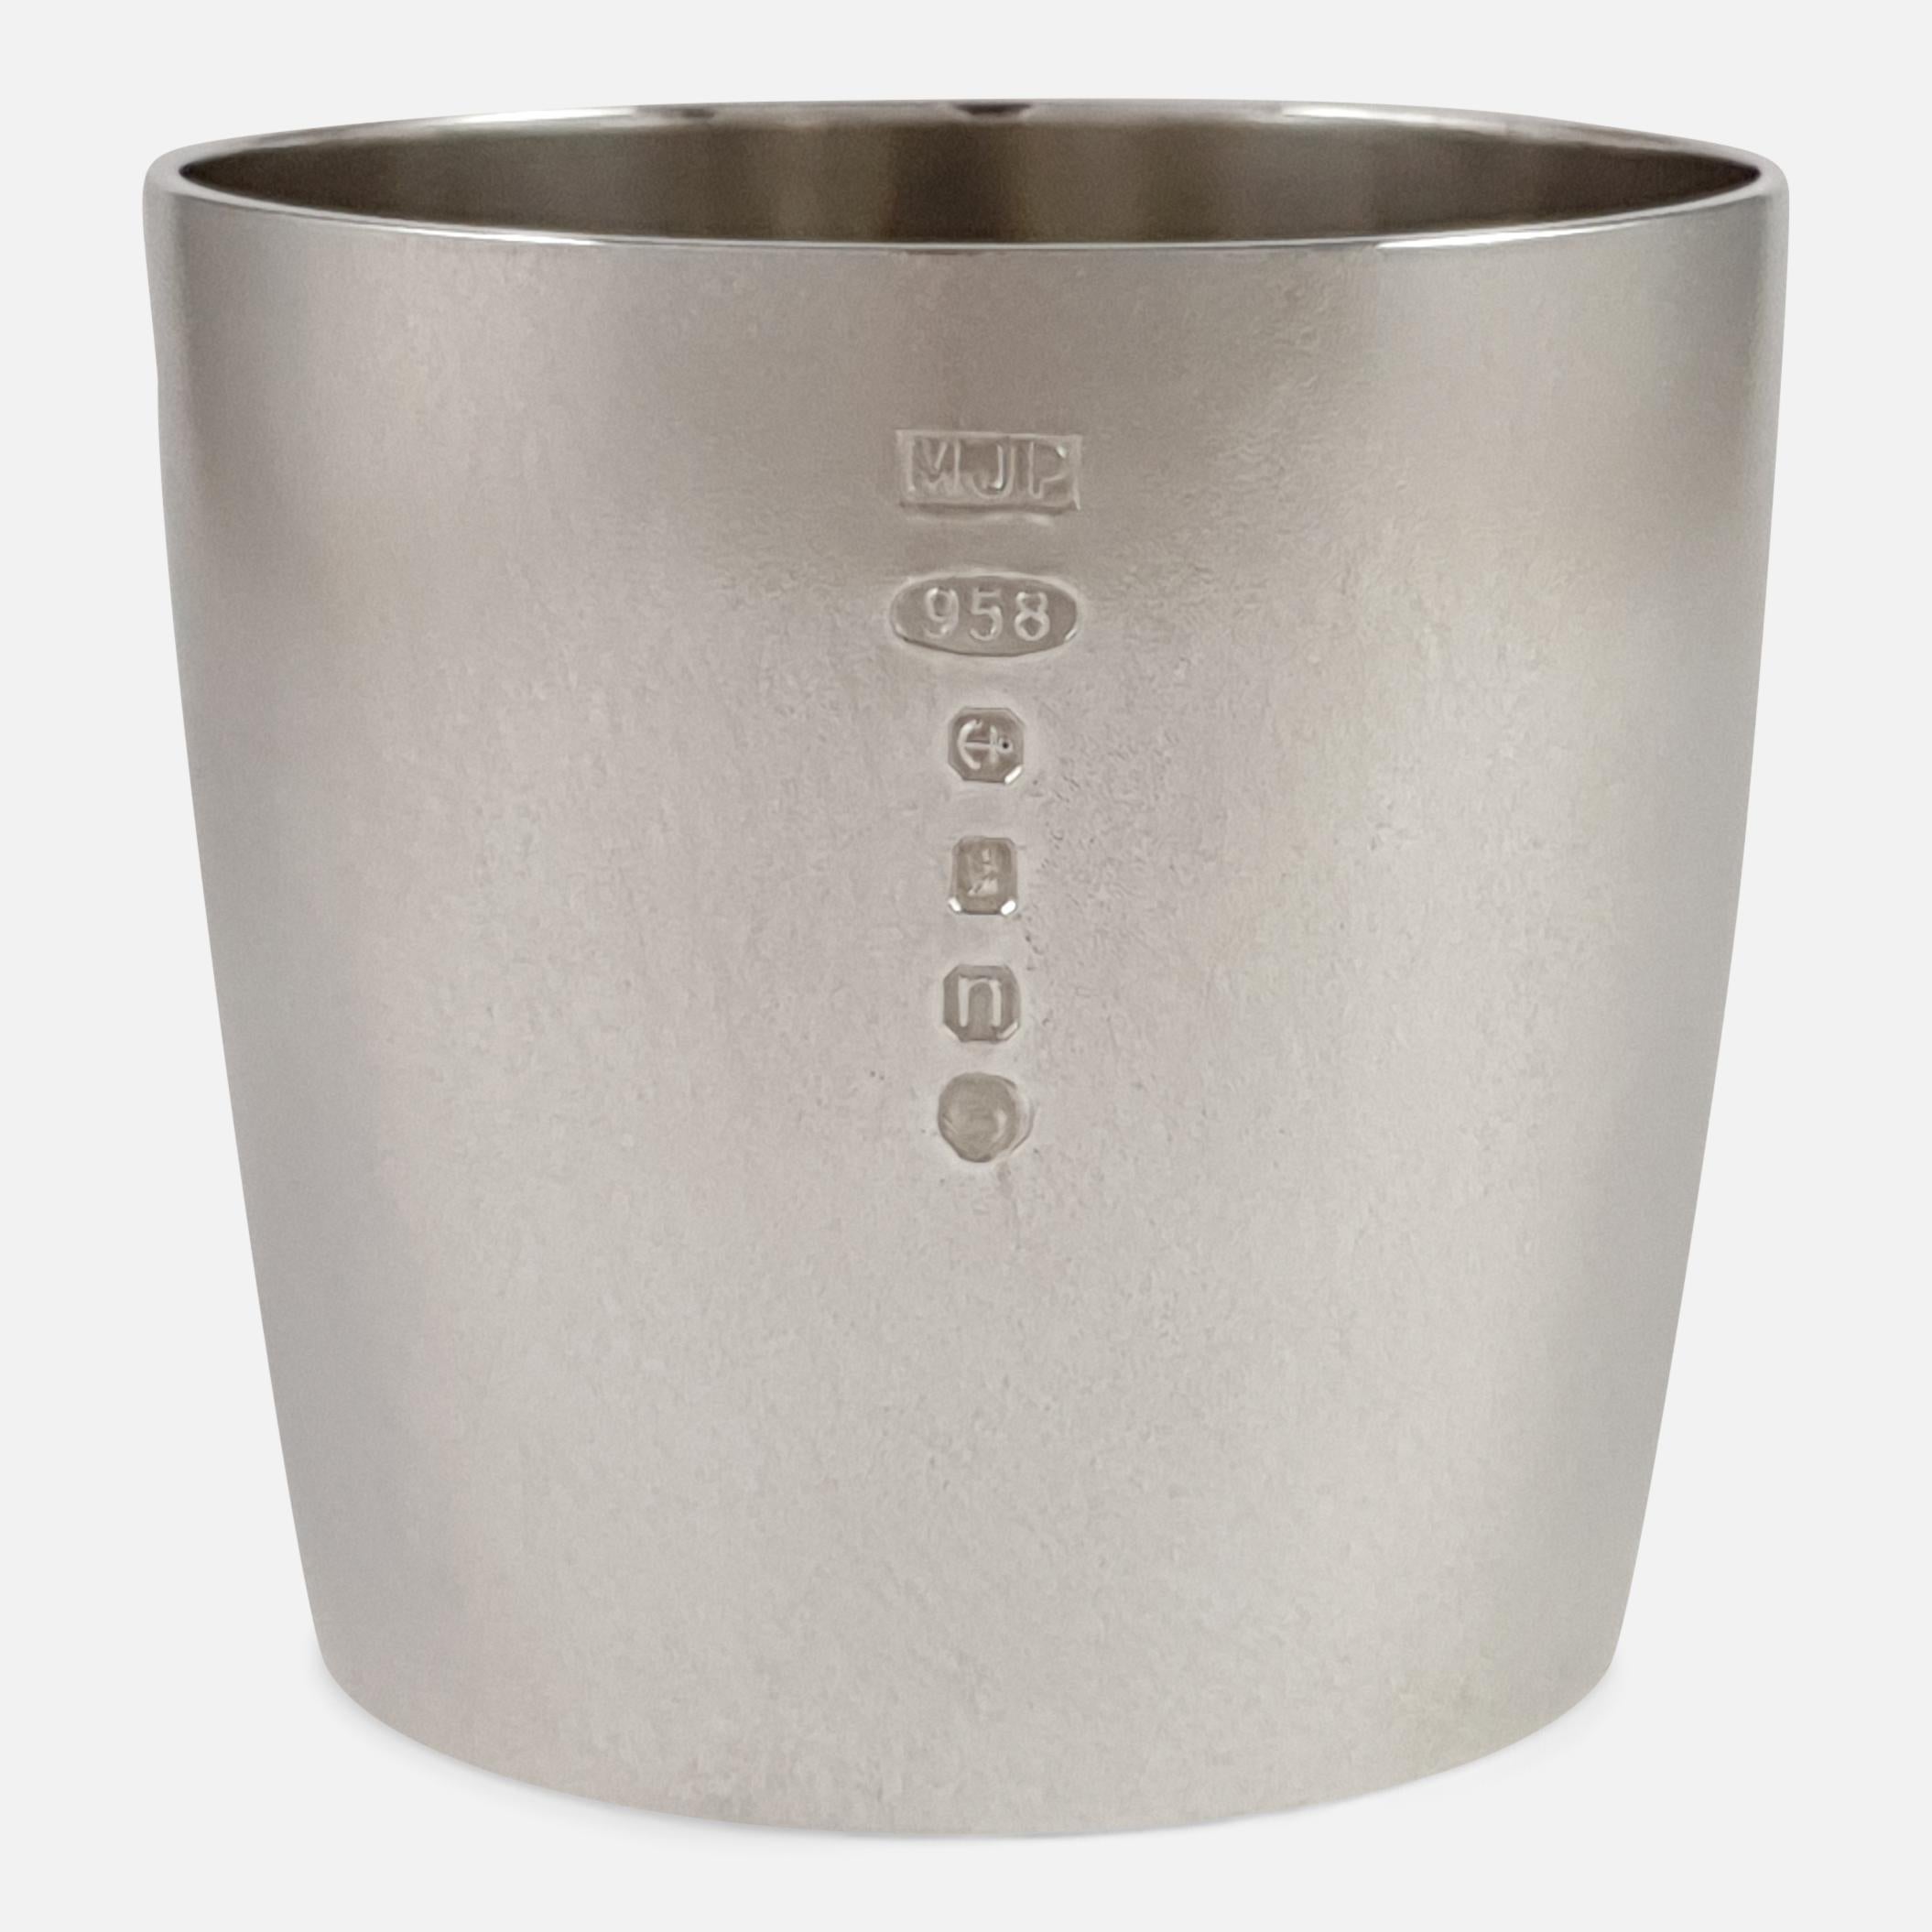 A Britannia silver 'Arc' beaker cup made by Martyn Pugh. The beaker is of tapering cylindrical form, with a matted finish. The beaker is hallmarked Birmingham, 2012, with the additional Diamond jubilee mark.

Assay: - .958 Britannia